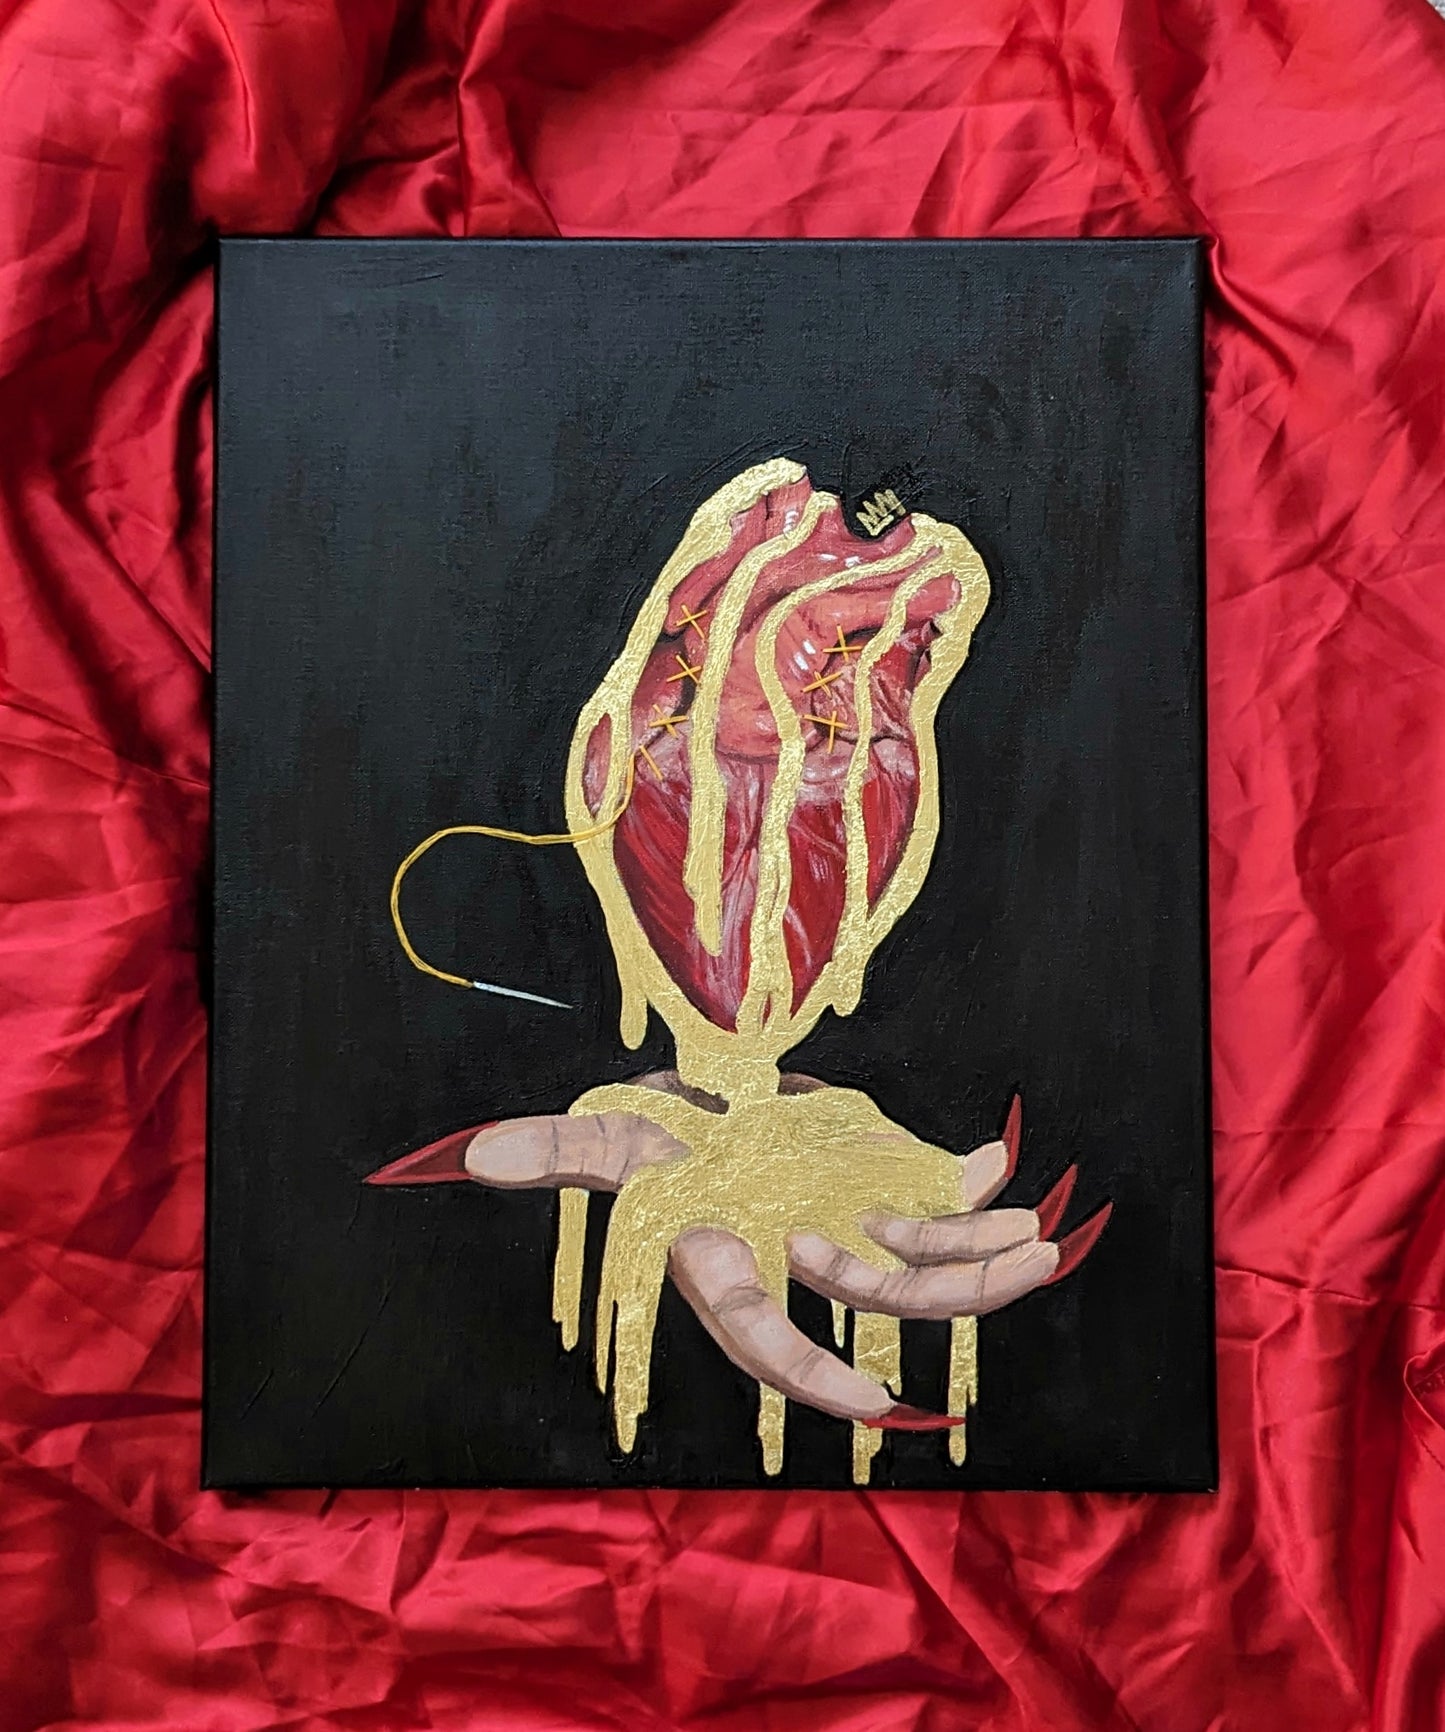 Human heart with gold pouring out of it into a hand. it is being mended with gold thread and needle. Gold is gold chrome paint and gold flakes for a reflective effect. heart is anatomical painted. Black bacground, brown hand with red nails. (Without flash)